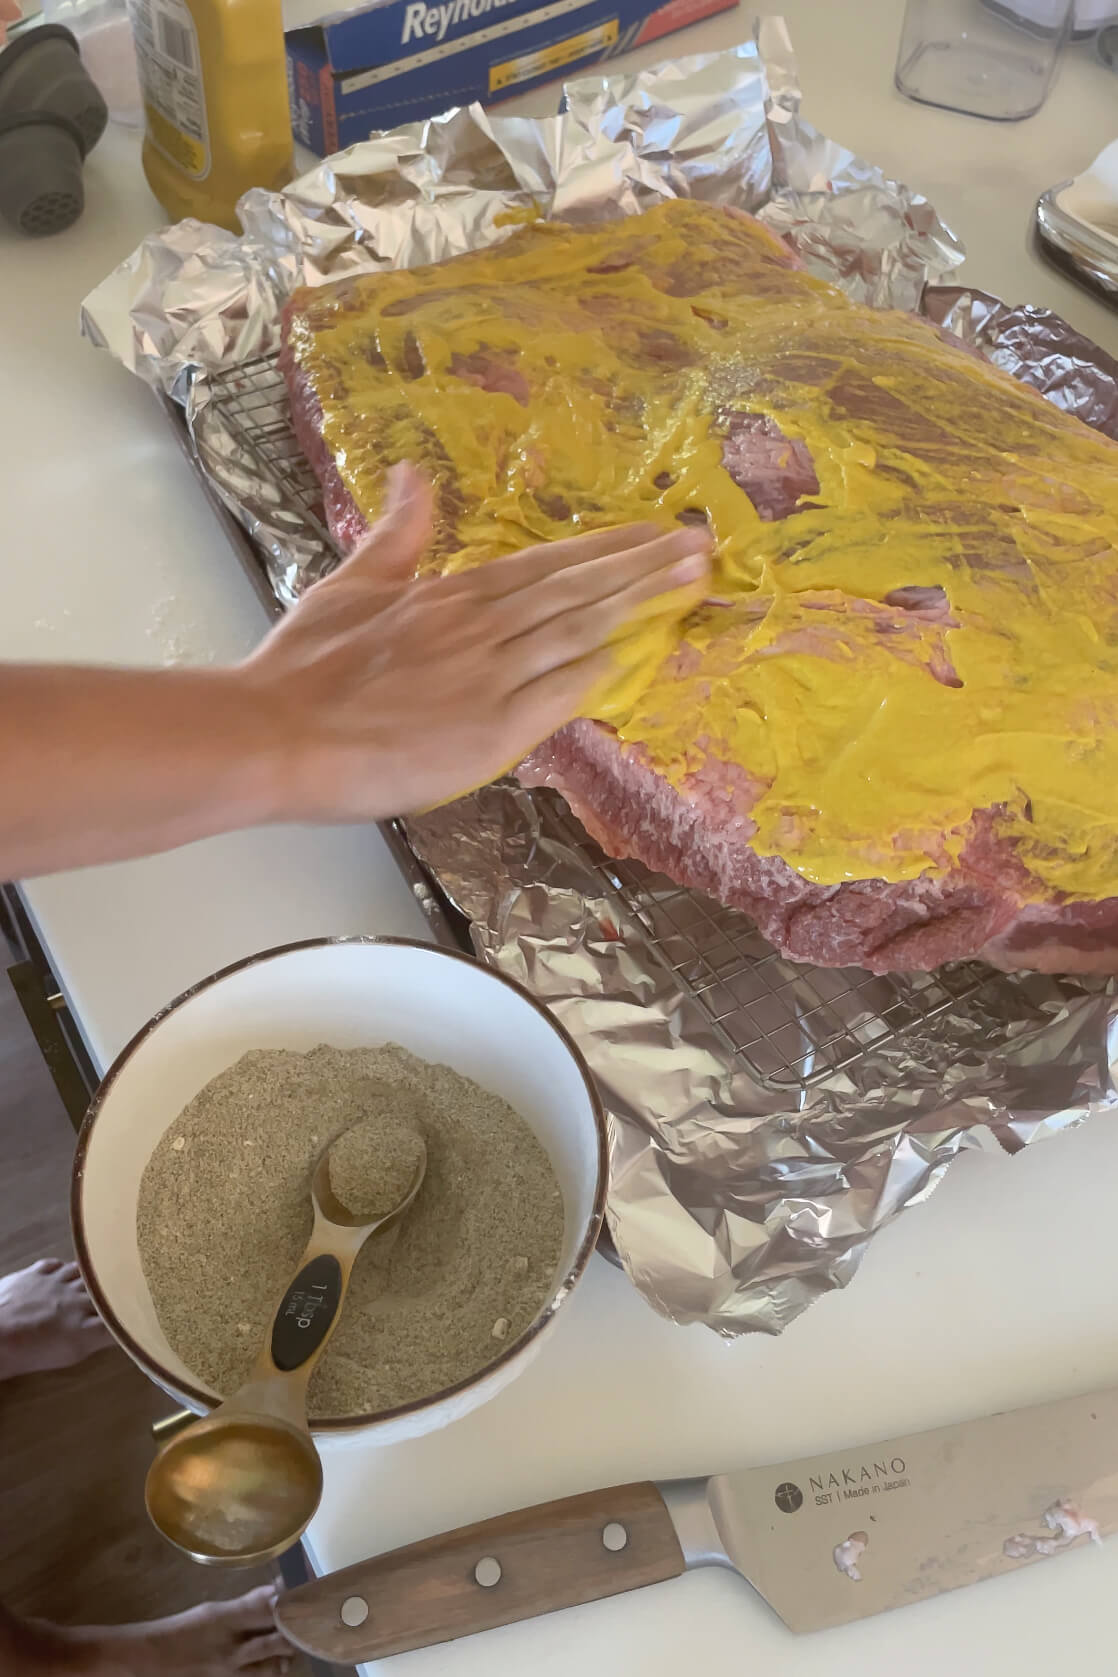 Covering a brisket with mustard before smoking.